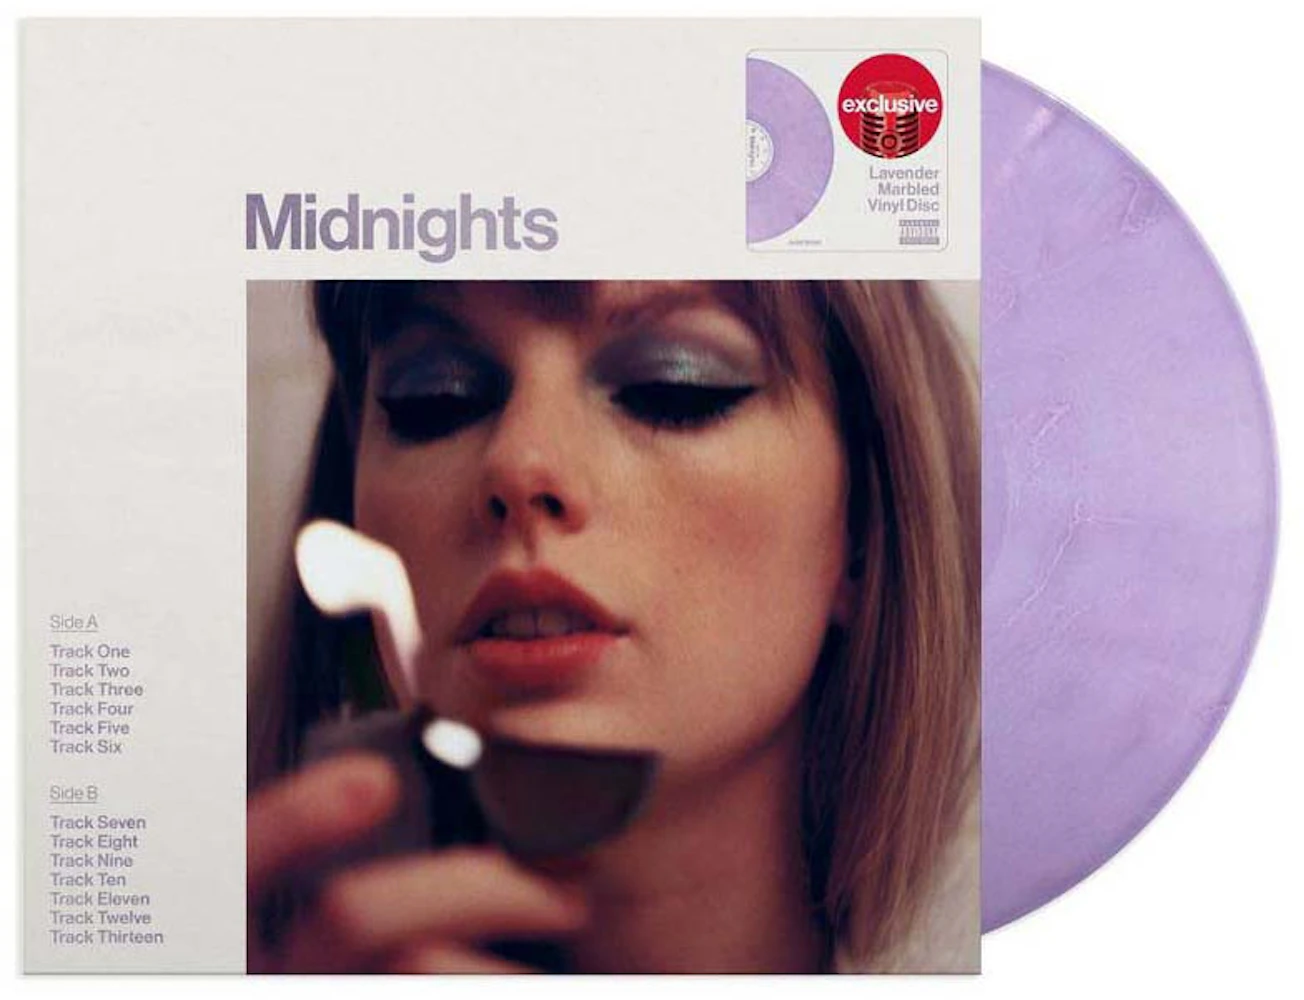 Taylor Swift Midnights Collection Lot of 4 Vinyl Records Target Lavender